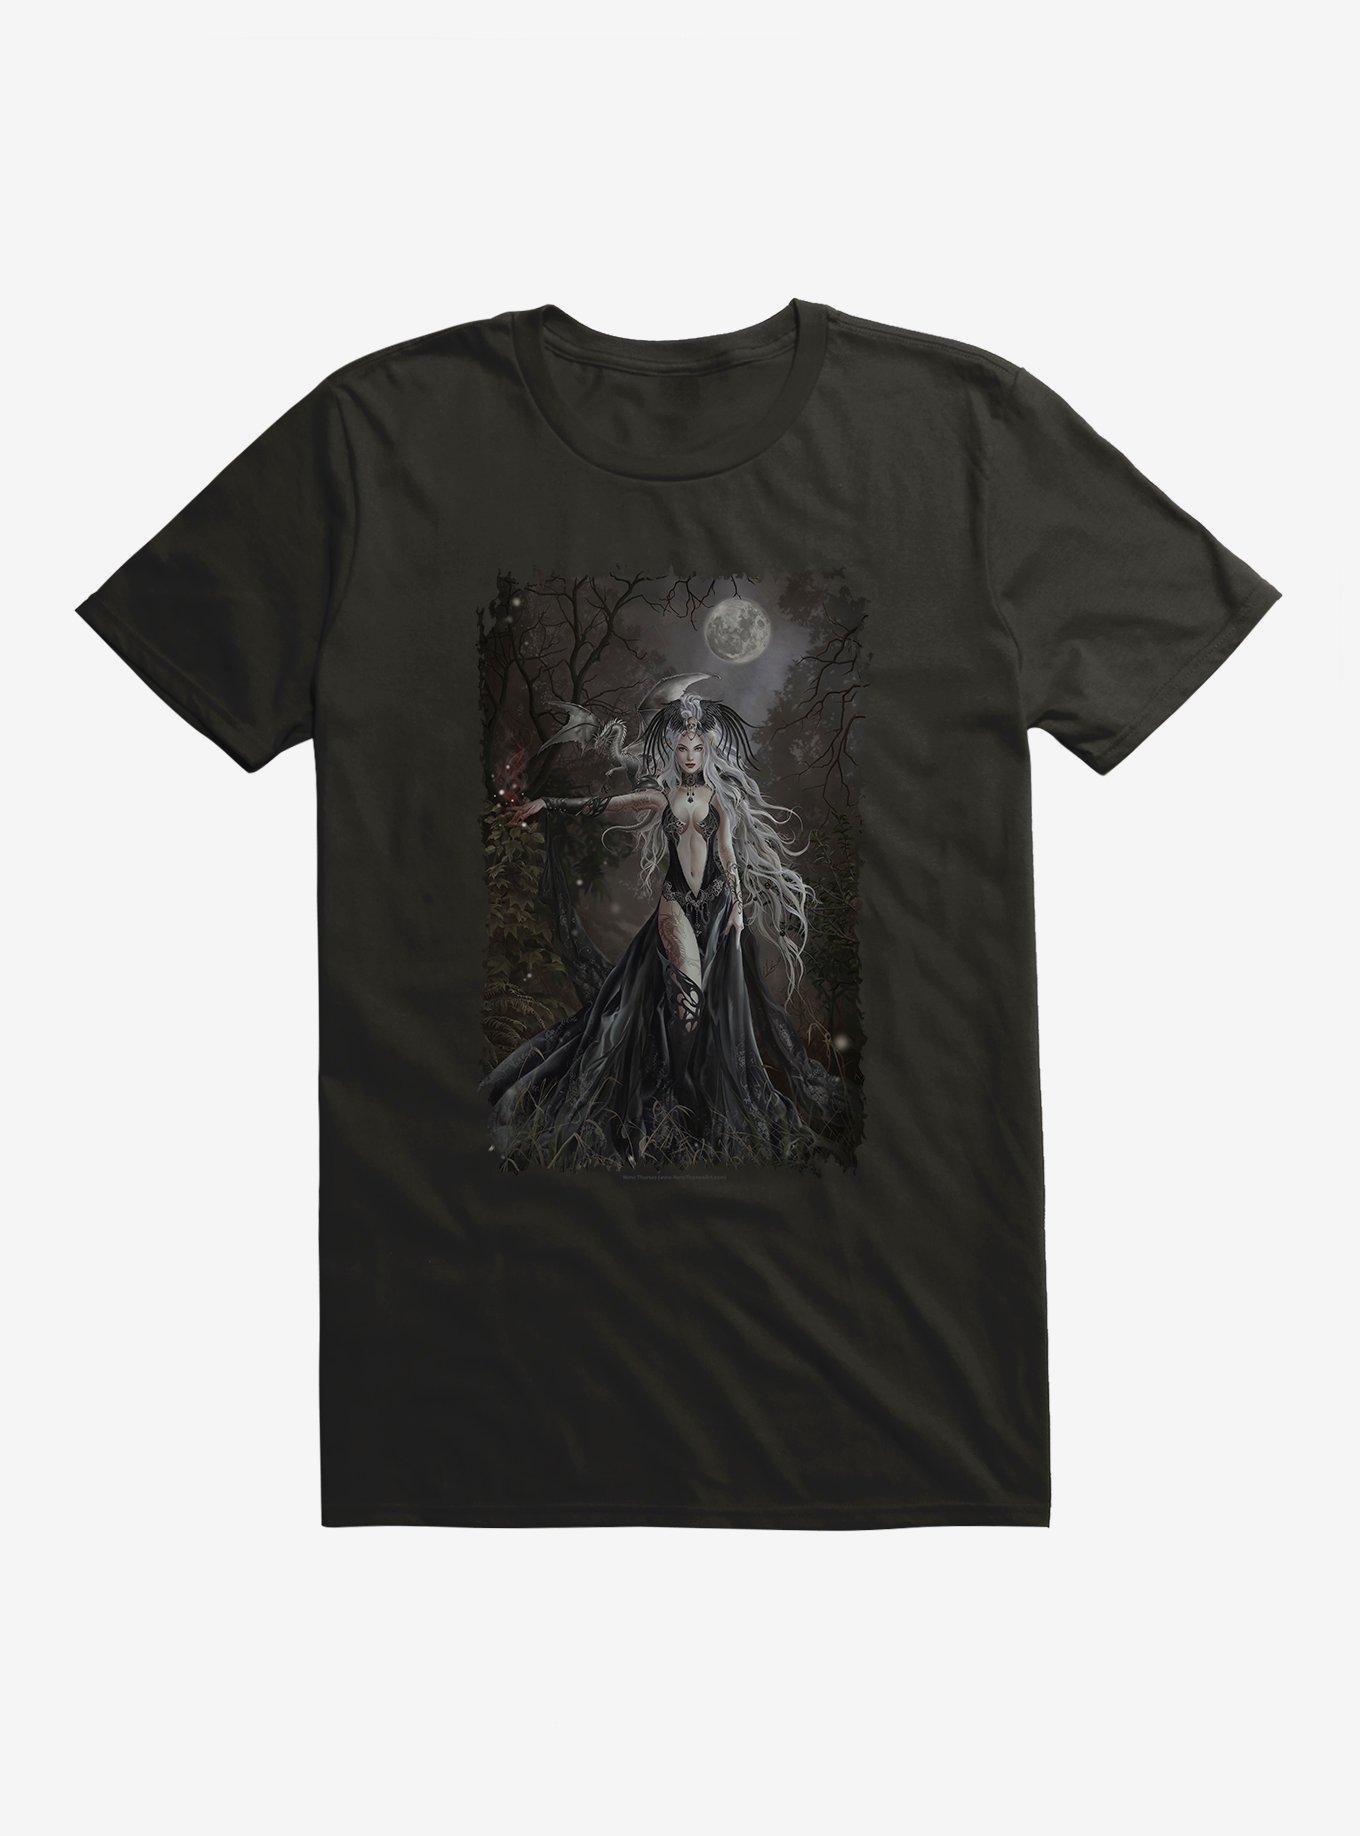 Queen Of Havoc T-Shirt by Nene Thomas, , hi-res